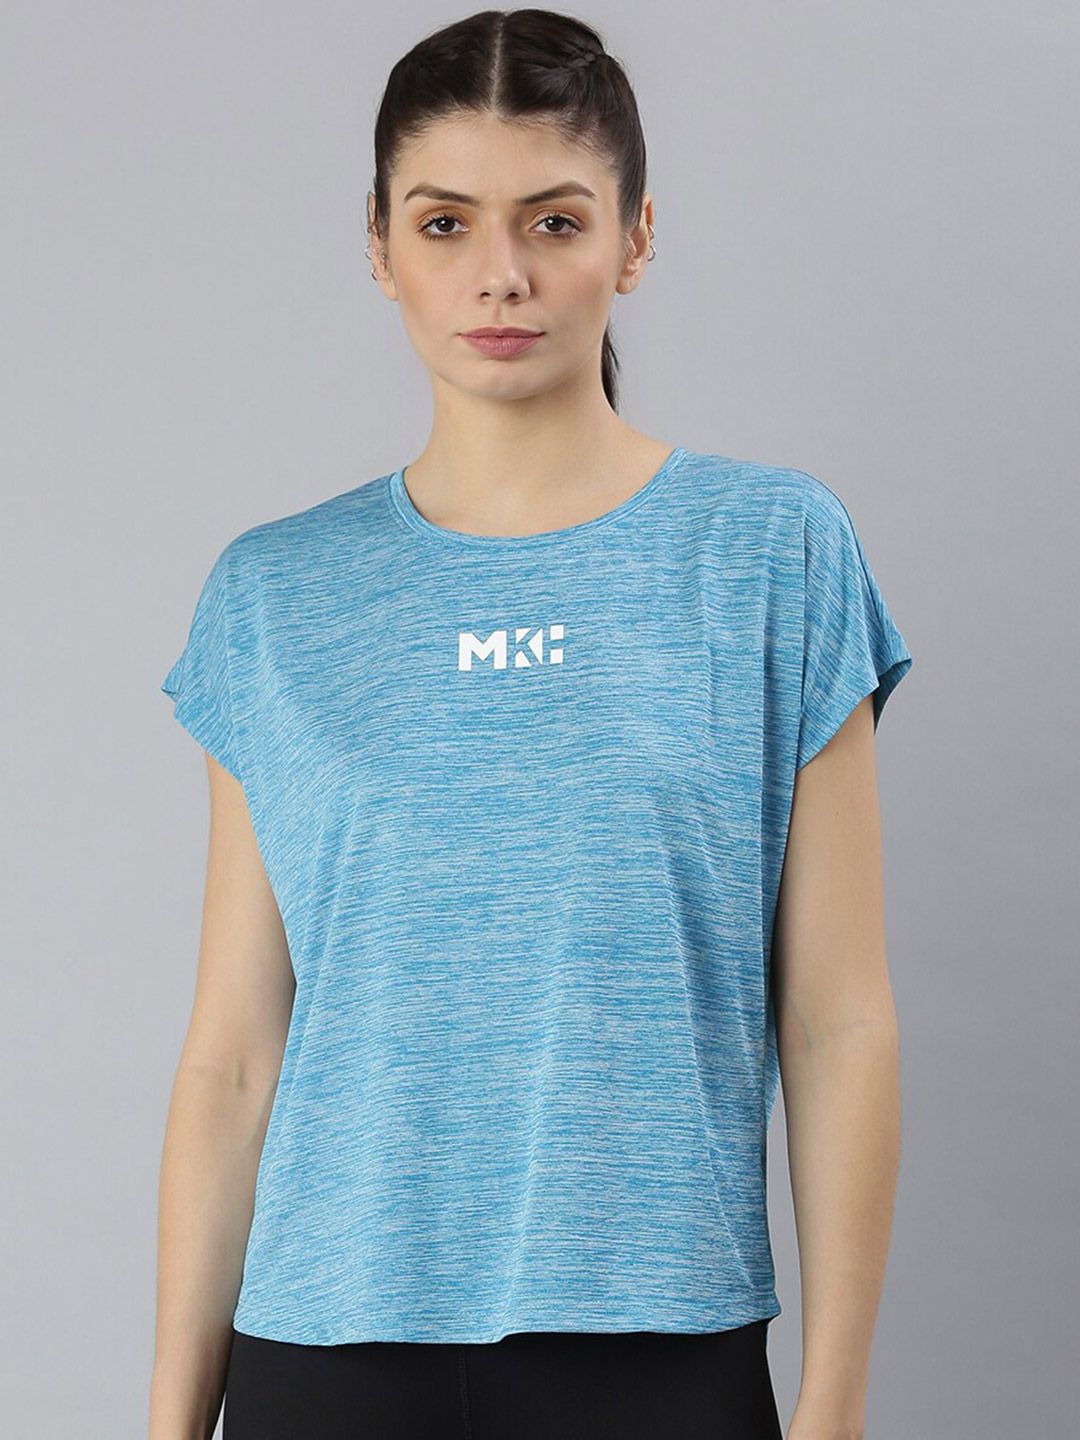 MKH Women Relaxed Fit Blue Dri-FIT T-shirt Price in India